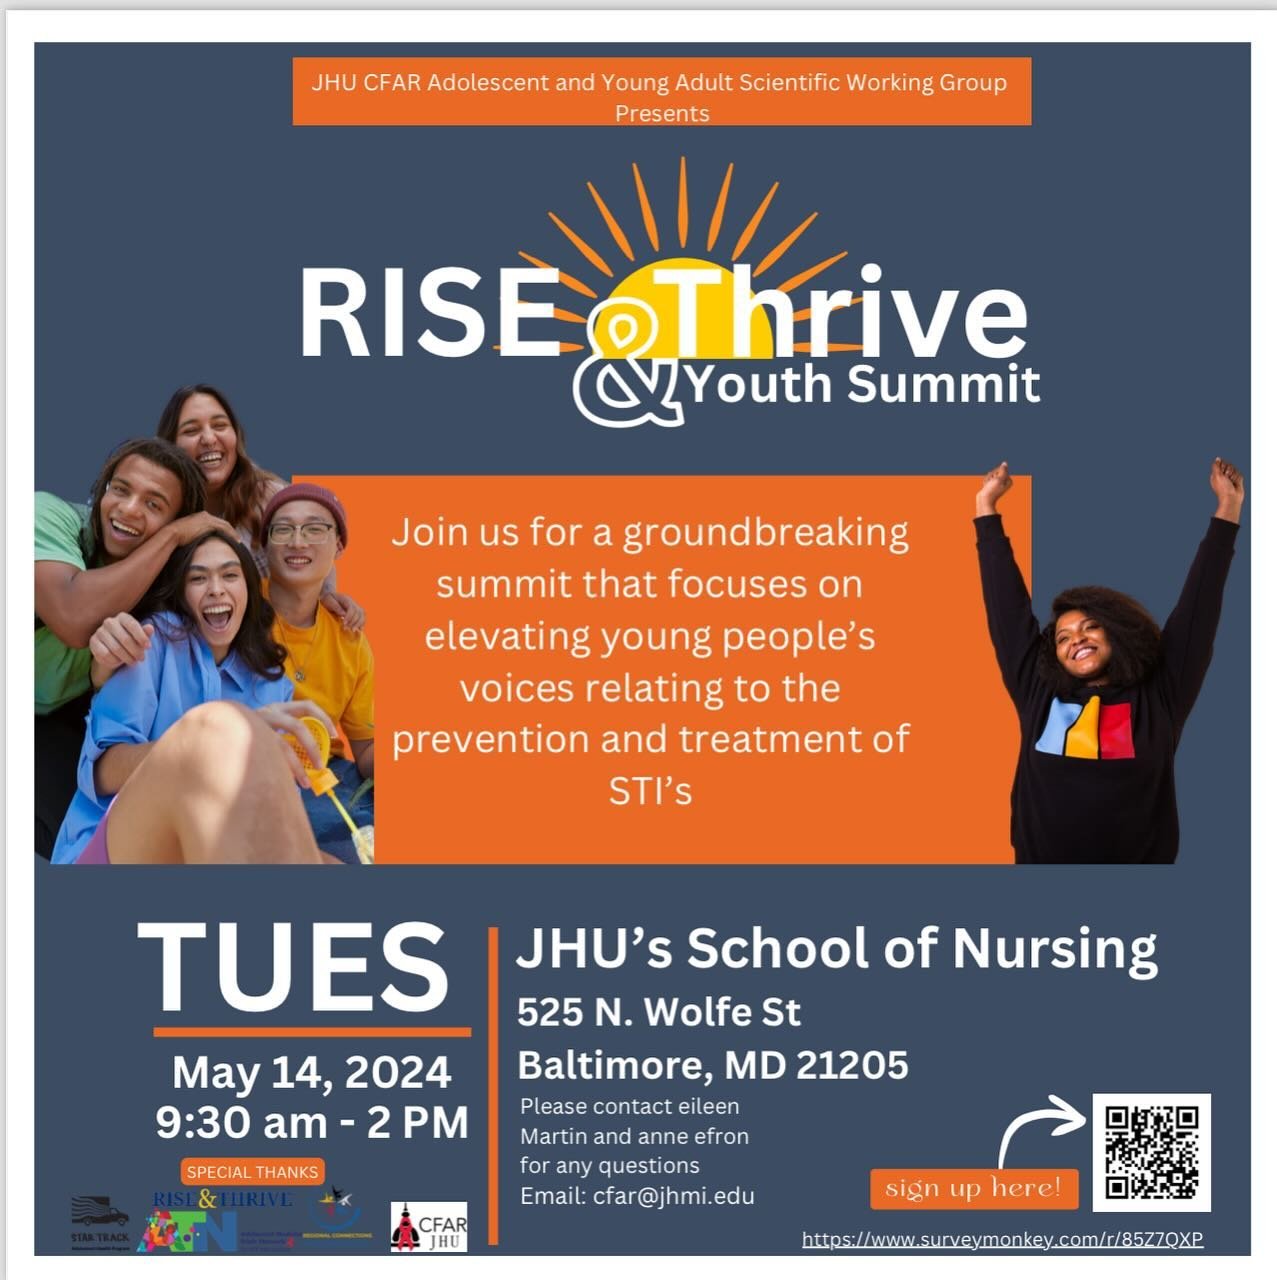 Hey family and friends! Please check out this summit on May 14th. If you're a student between the ages of 13-26 and would like to network with leaders of your community, please register here. Look forward to:

&bull;Leadership, networking, community 